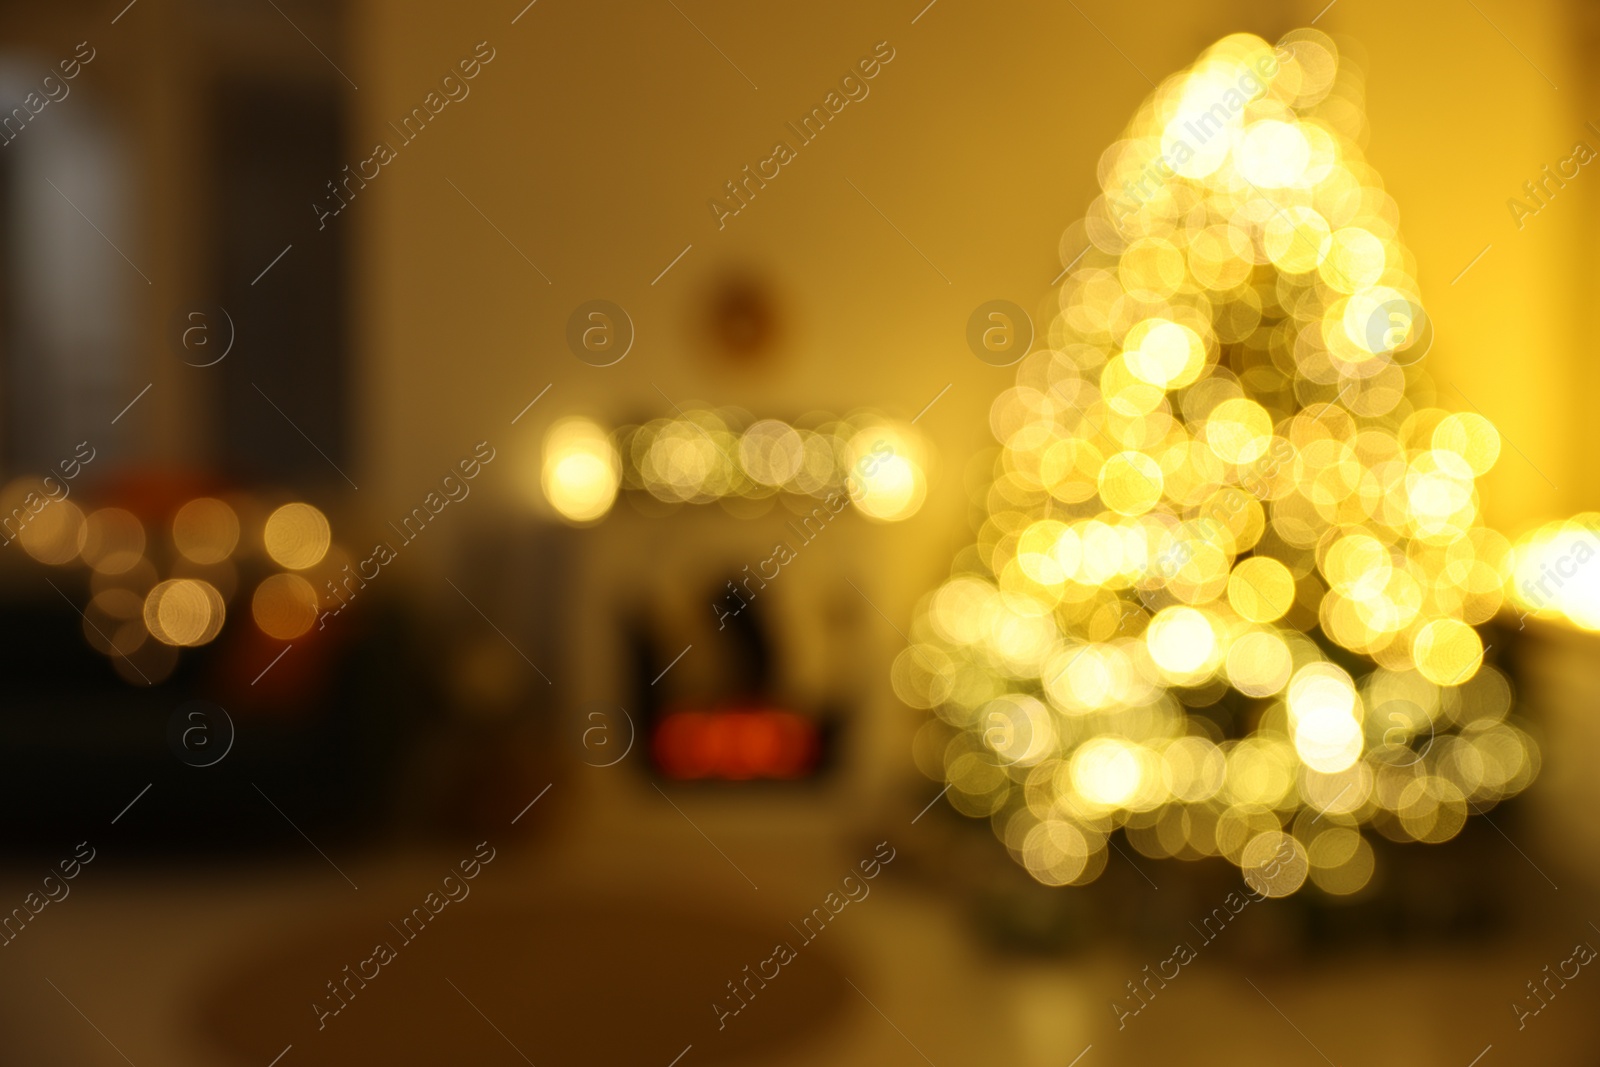 Photo of Stylish fireplace between Christmas tree and sofa in cosy room, blurred view